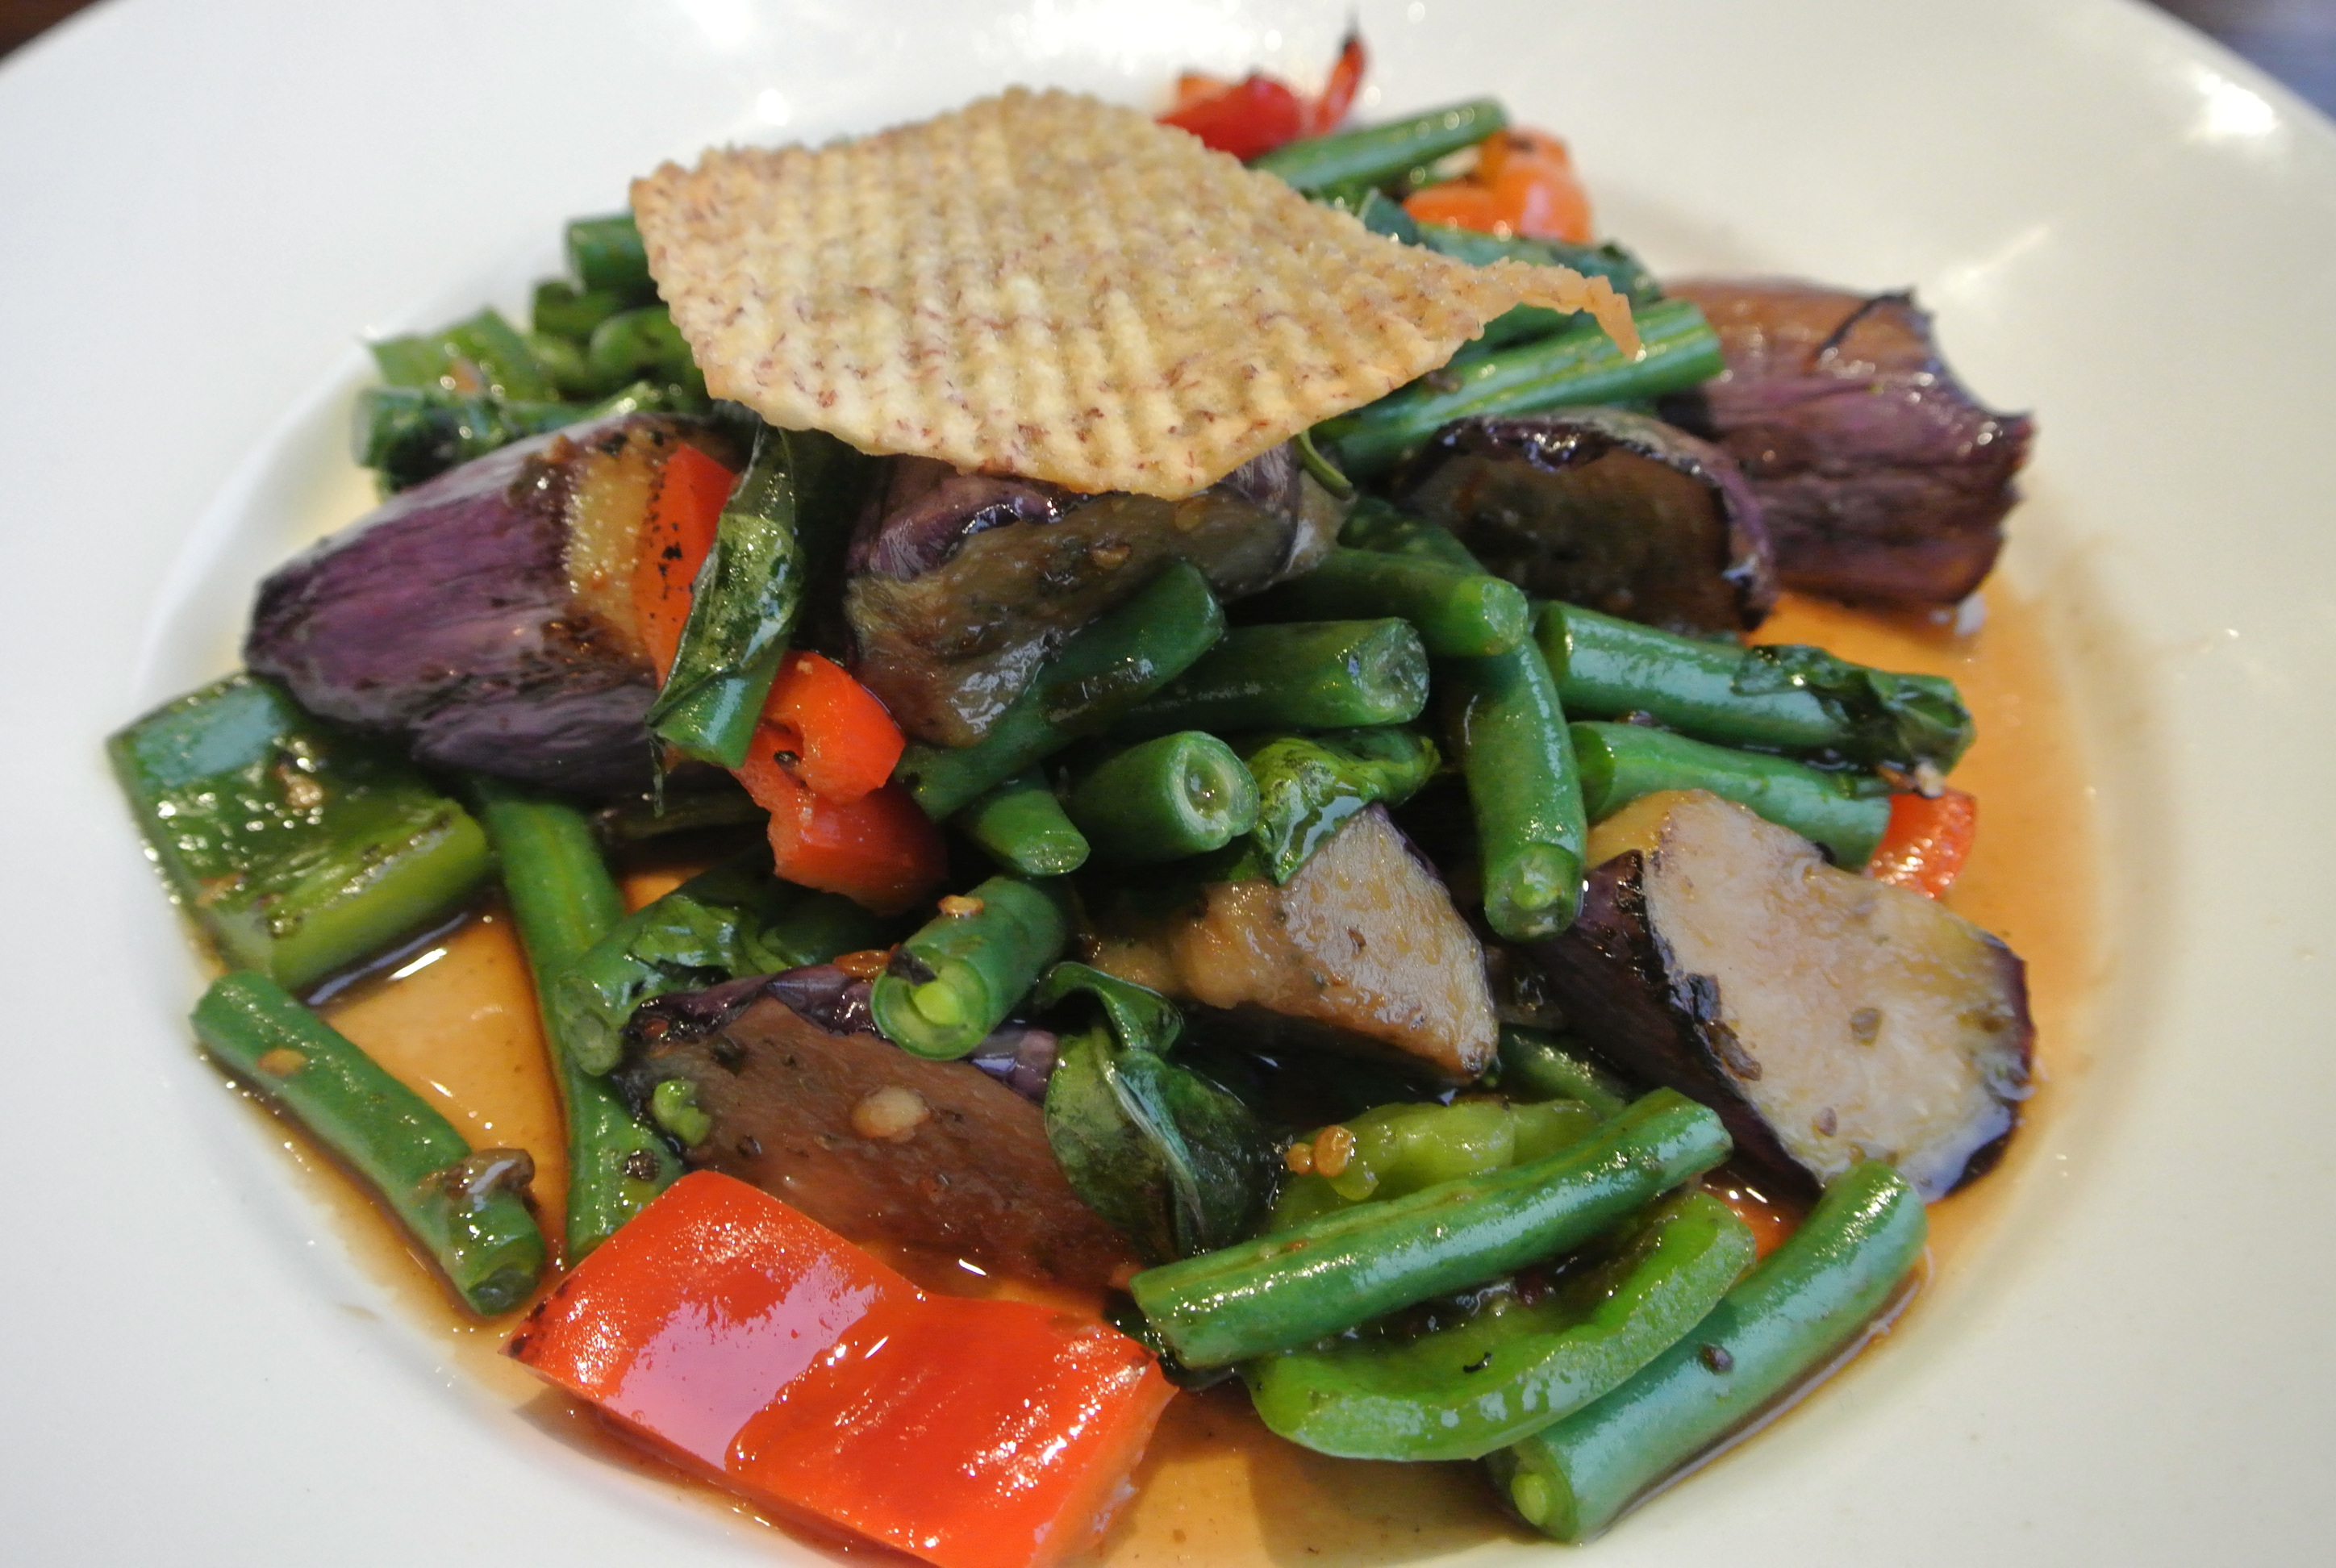 SAUTEED STRING BEANS AND EGGPLANT